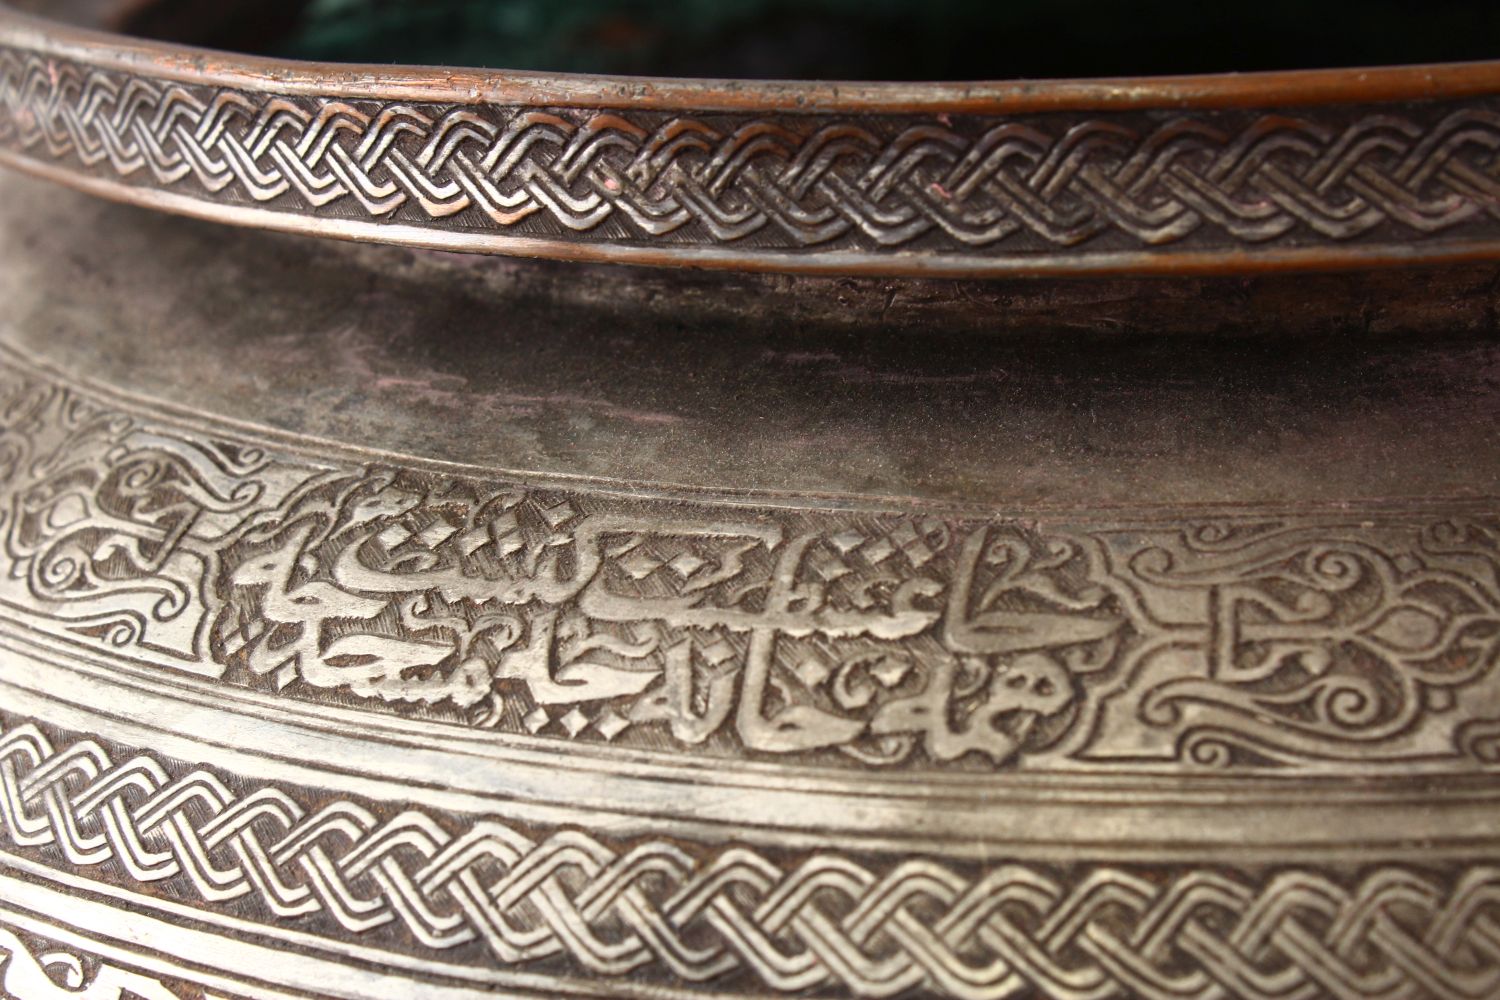 A LARGE ISLAMIC TINNED BRONZE SAFAVID CALLIGRAPHIC BOWL, the body with chased formal intertwined - Image 9 of 13